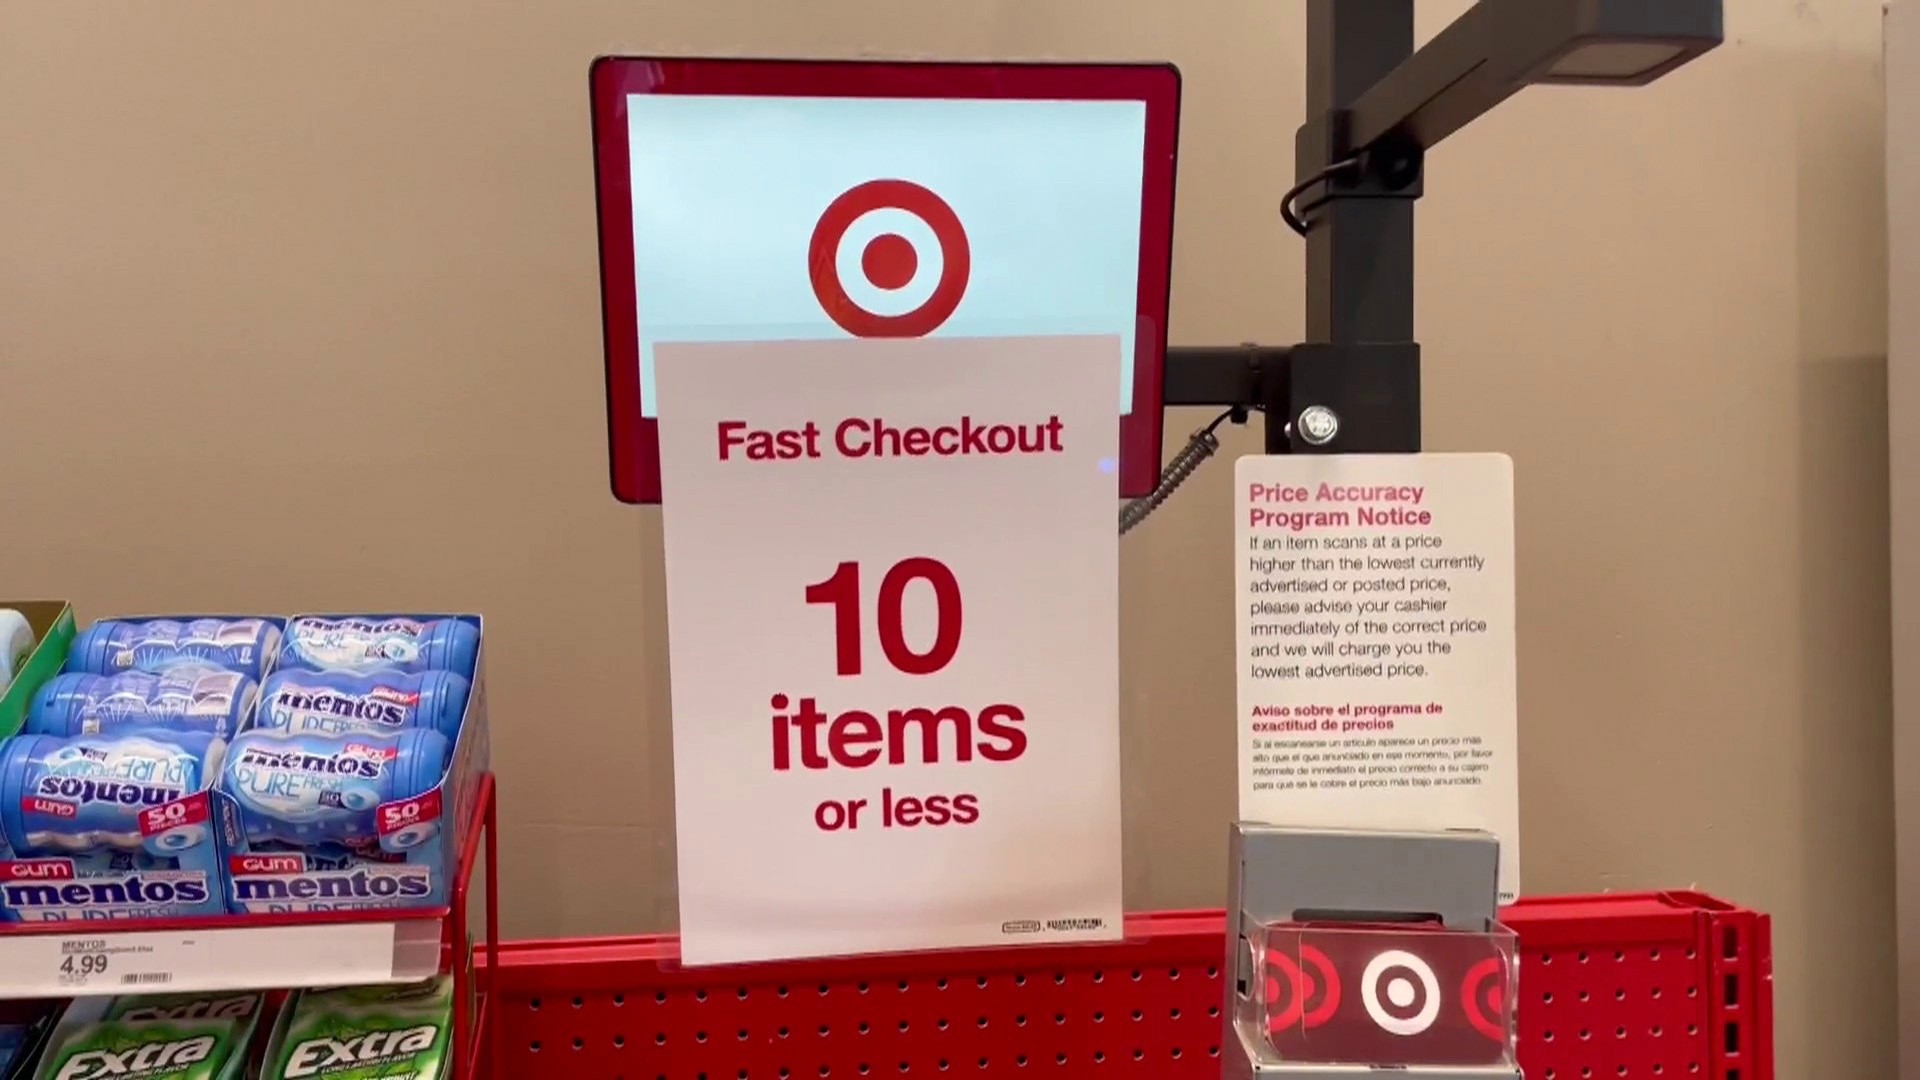 New Checkout Cameras at Target: How Will Shopping Change in 2024?